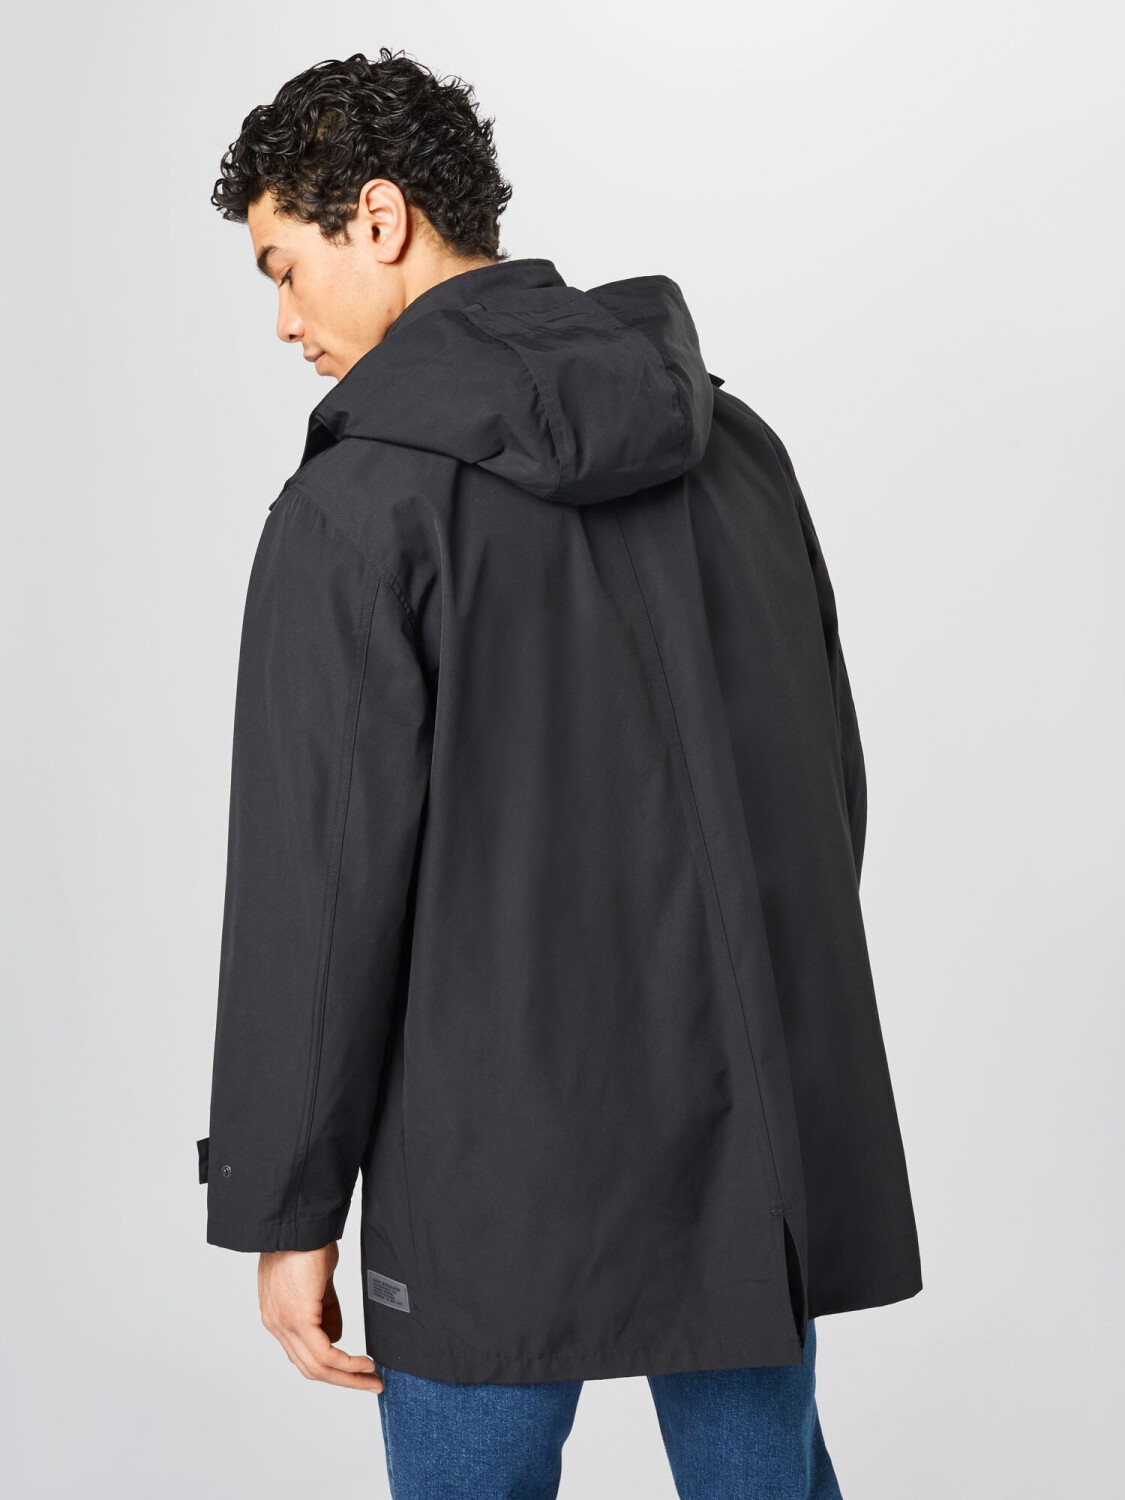 Buy Levi's Mission Fishtail Parka caviar (28412-0006) from £78.99 ...